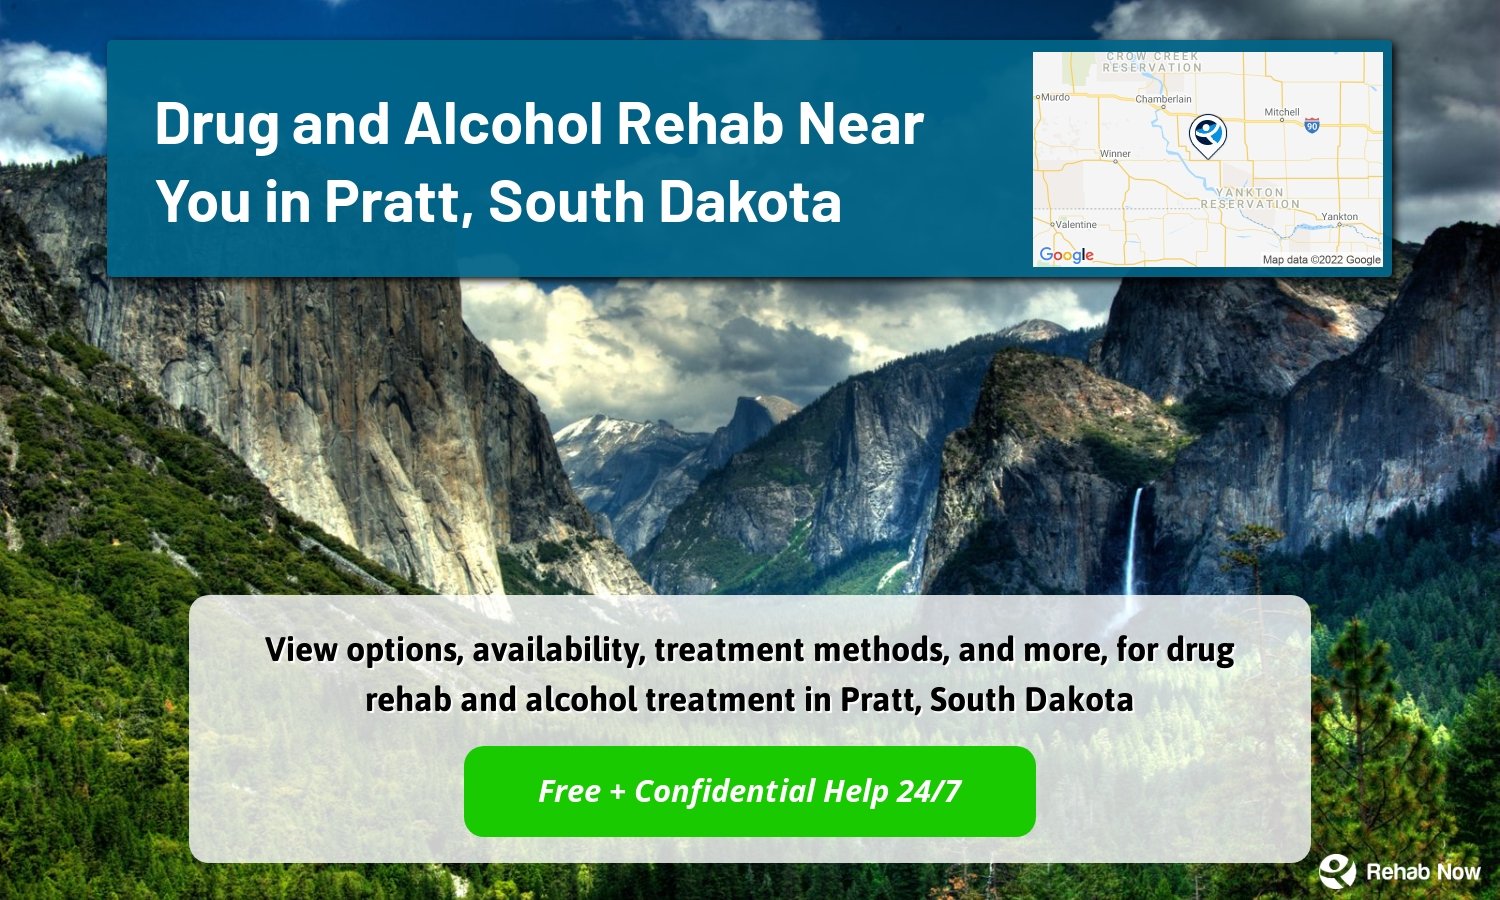 View options, availability, treatment methods, and more, for drug rehab and alcohol treatment in Pratt, South Dakota